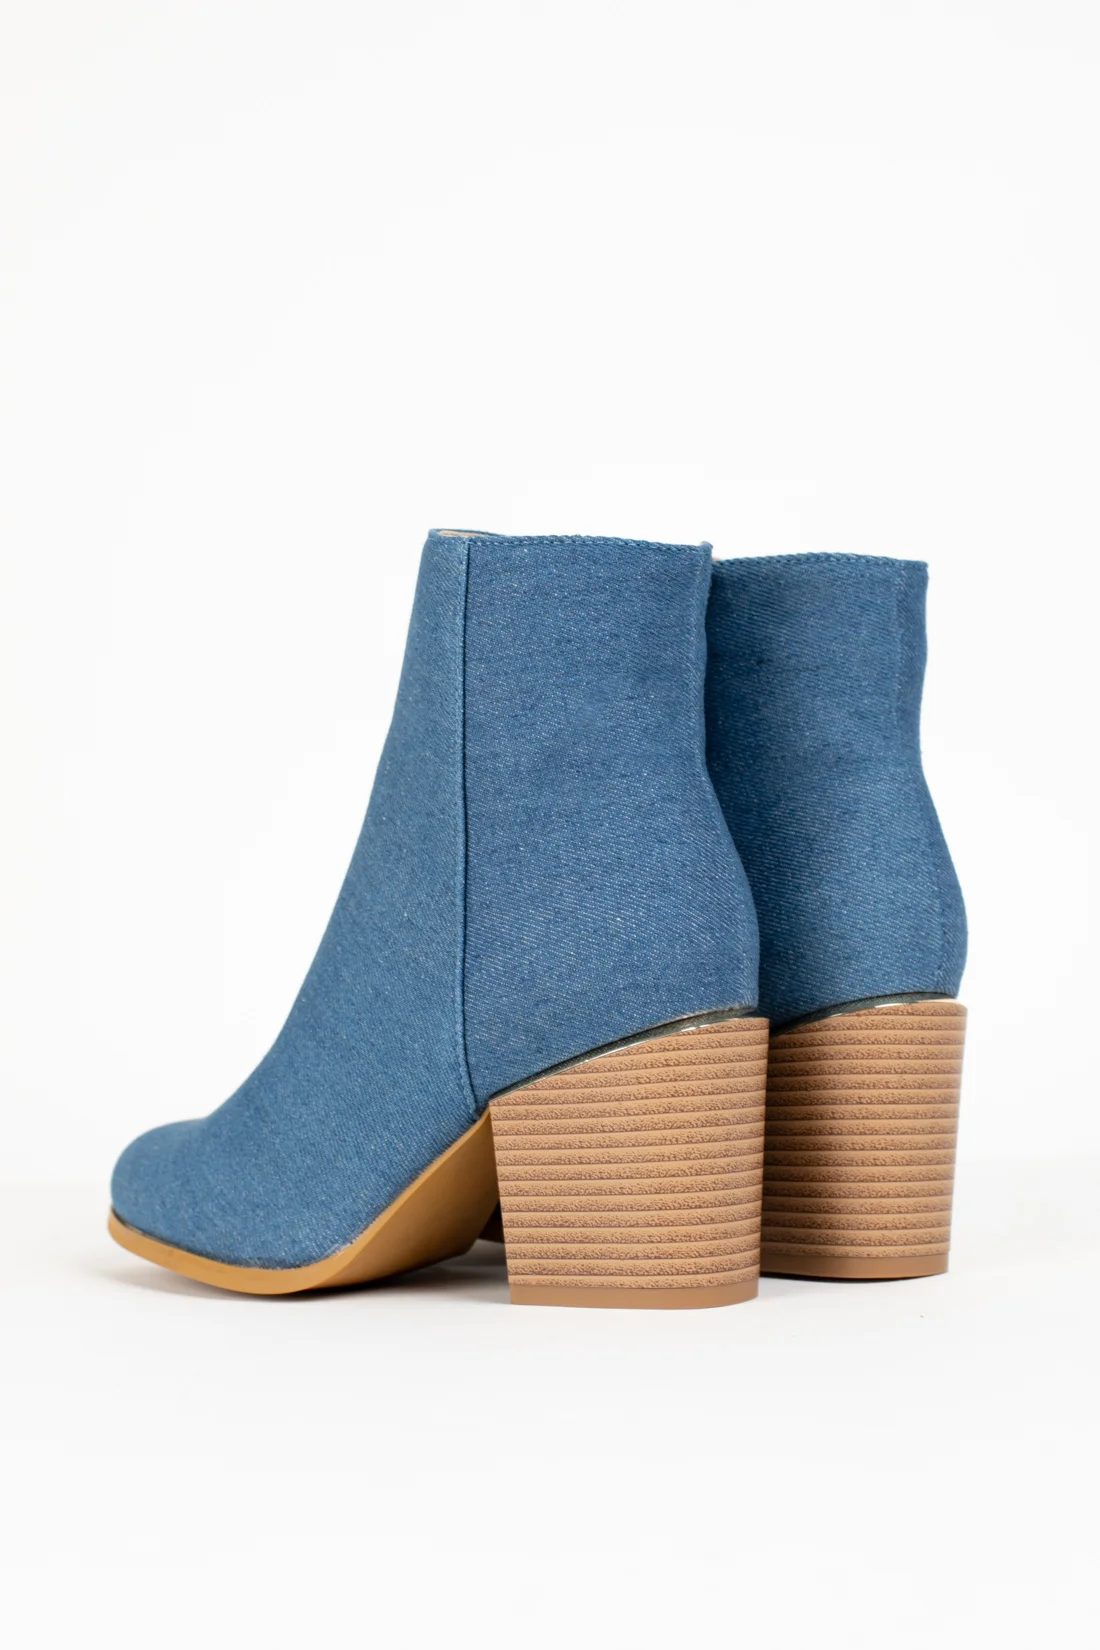 SITOR LOW BOOT - JEANS